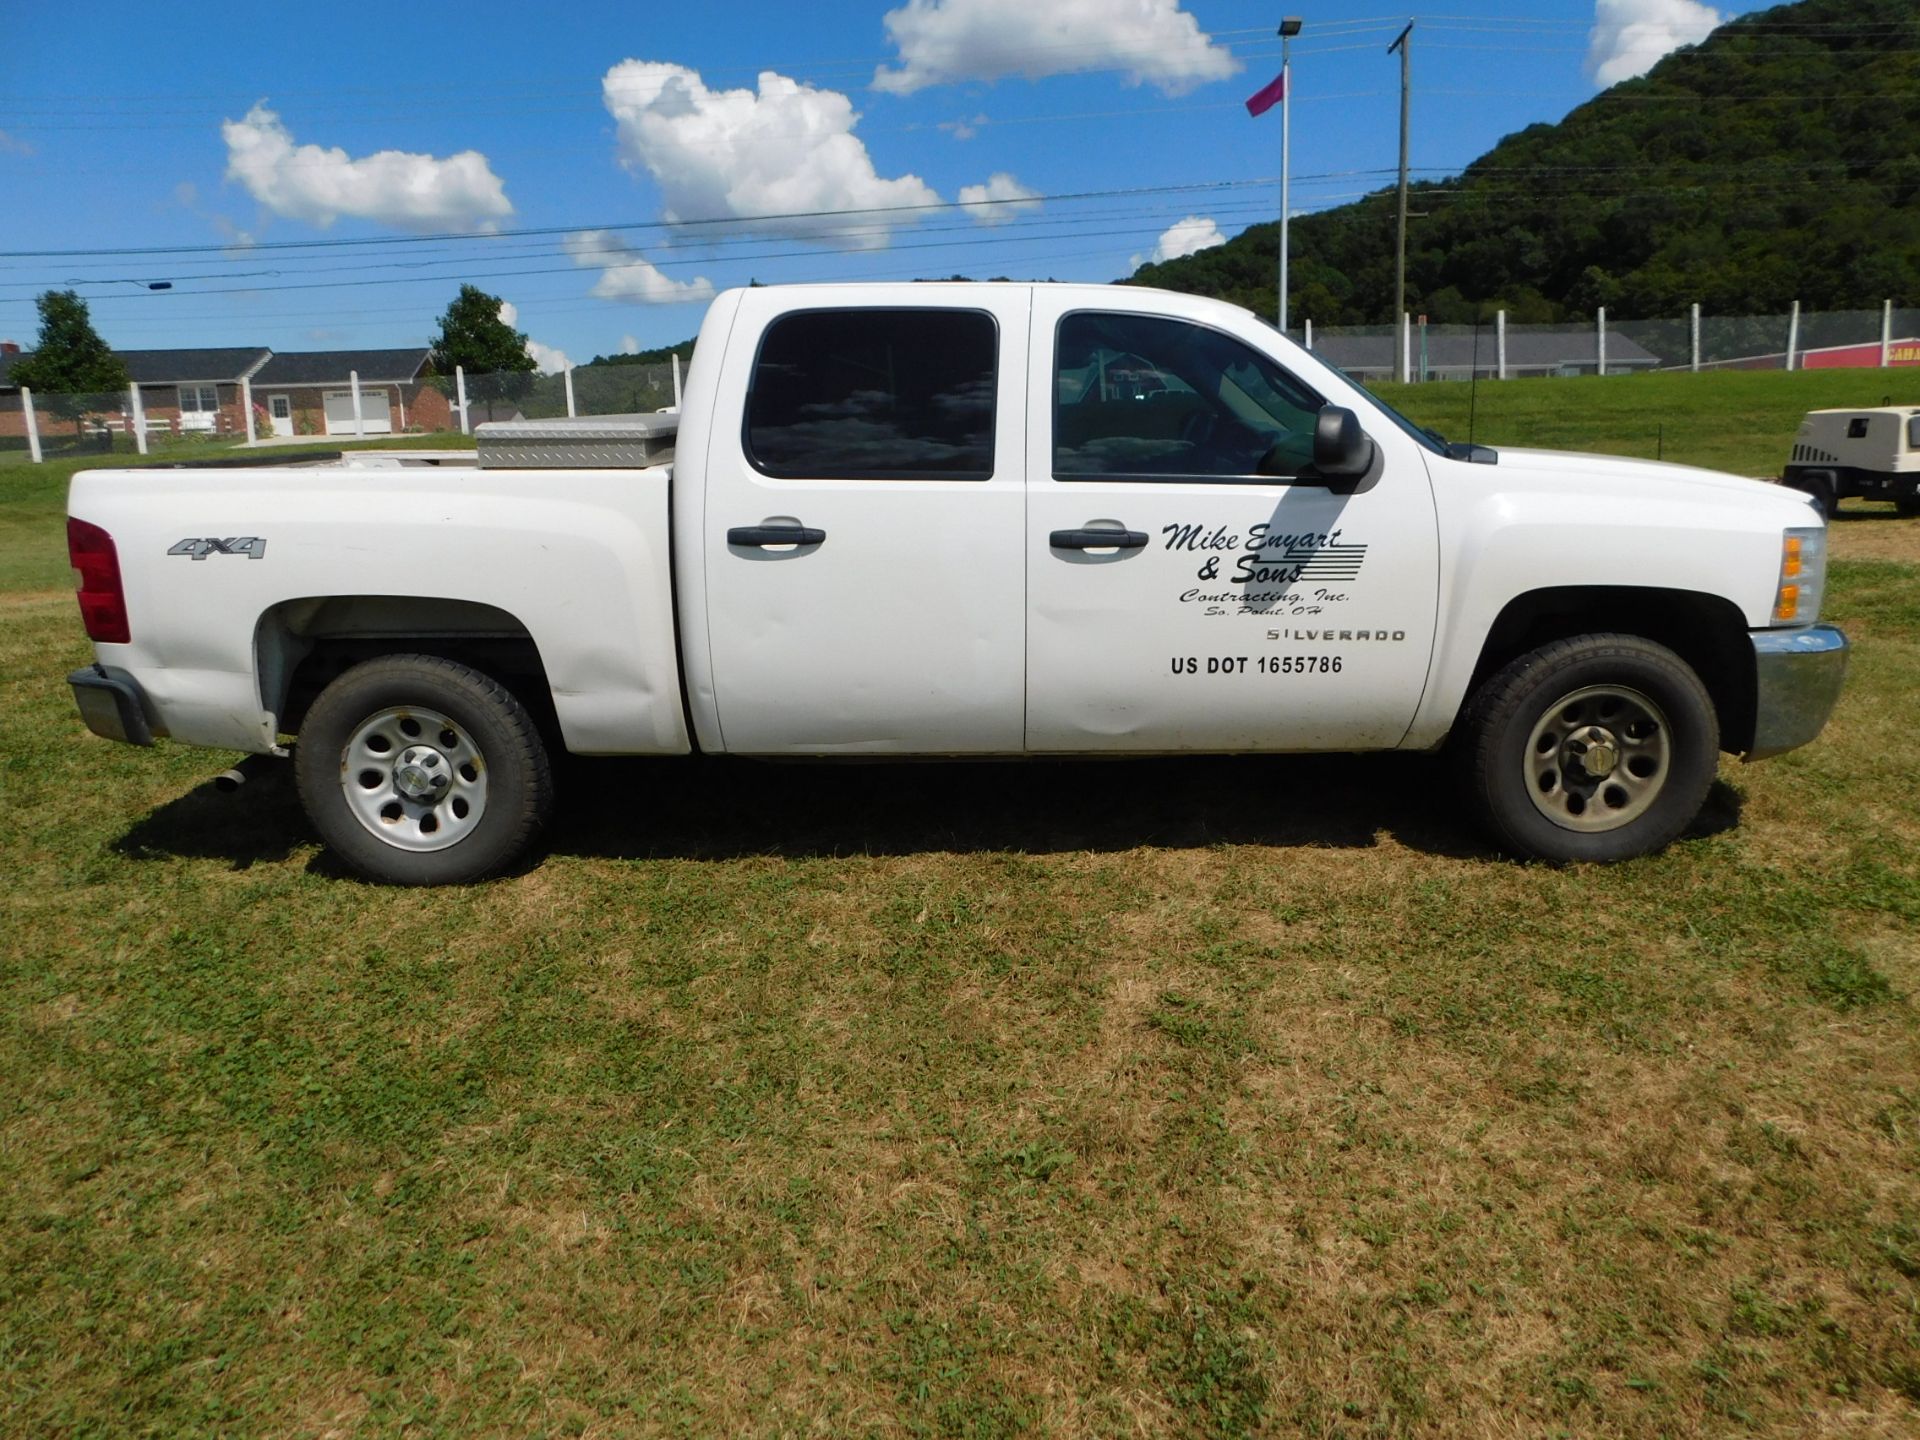 2011 Chevy 2500 Silverado Pickup, Crew Cab, 6' Bed, Automatic, AM/FM, 4WD, AC, PL, Aluminum Tool - Image 4 of 50